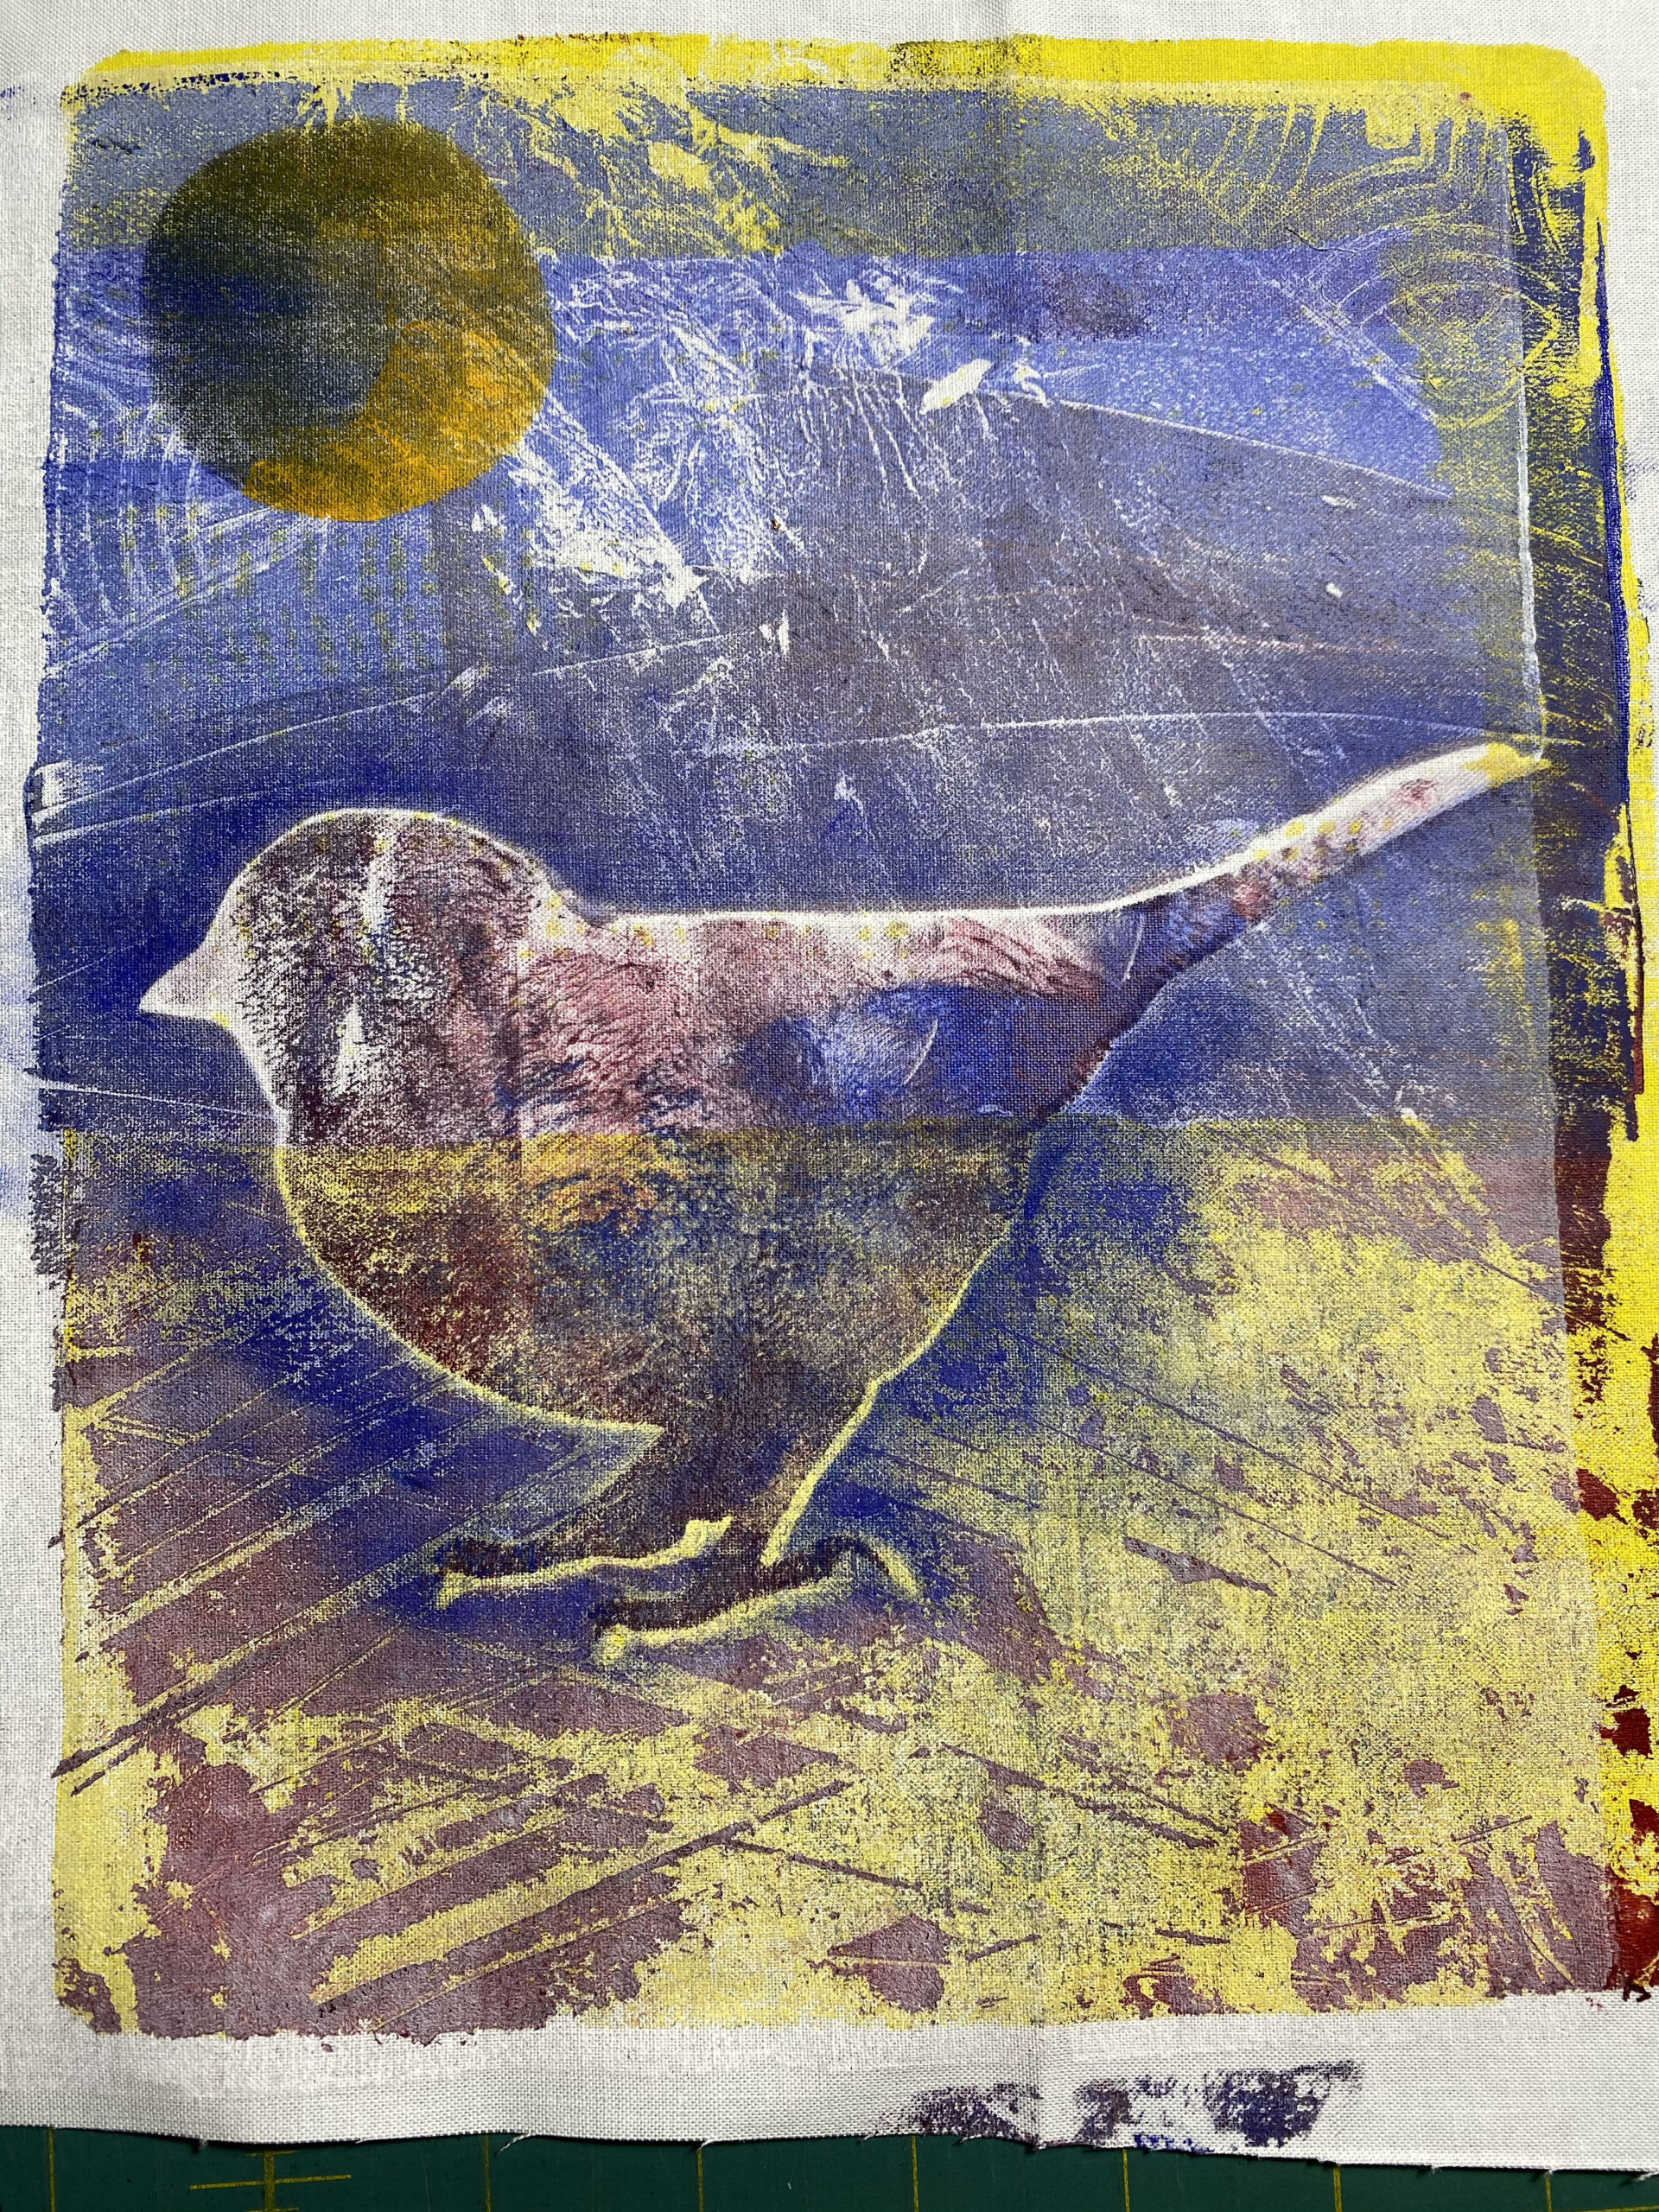 Layers in monoprint